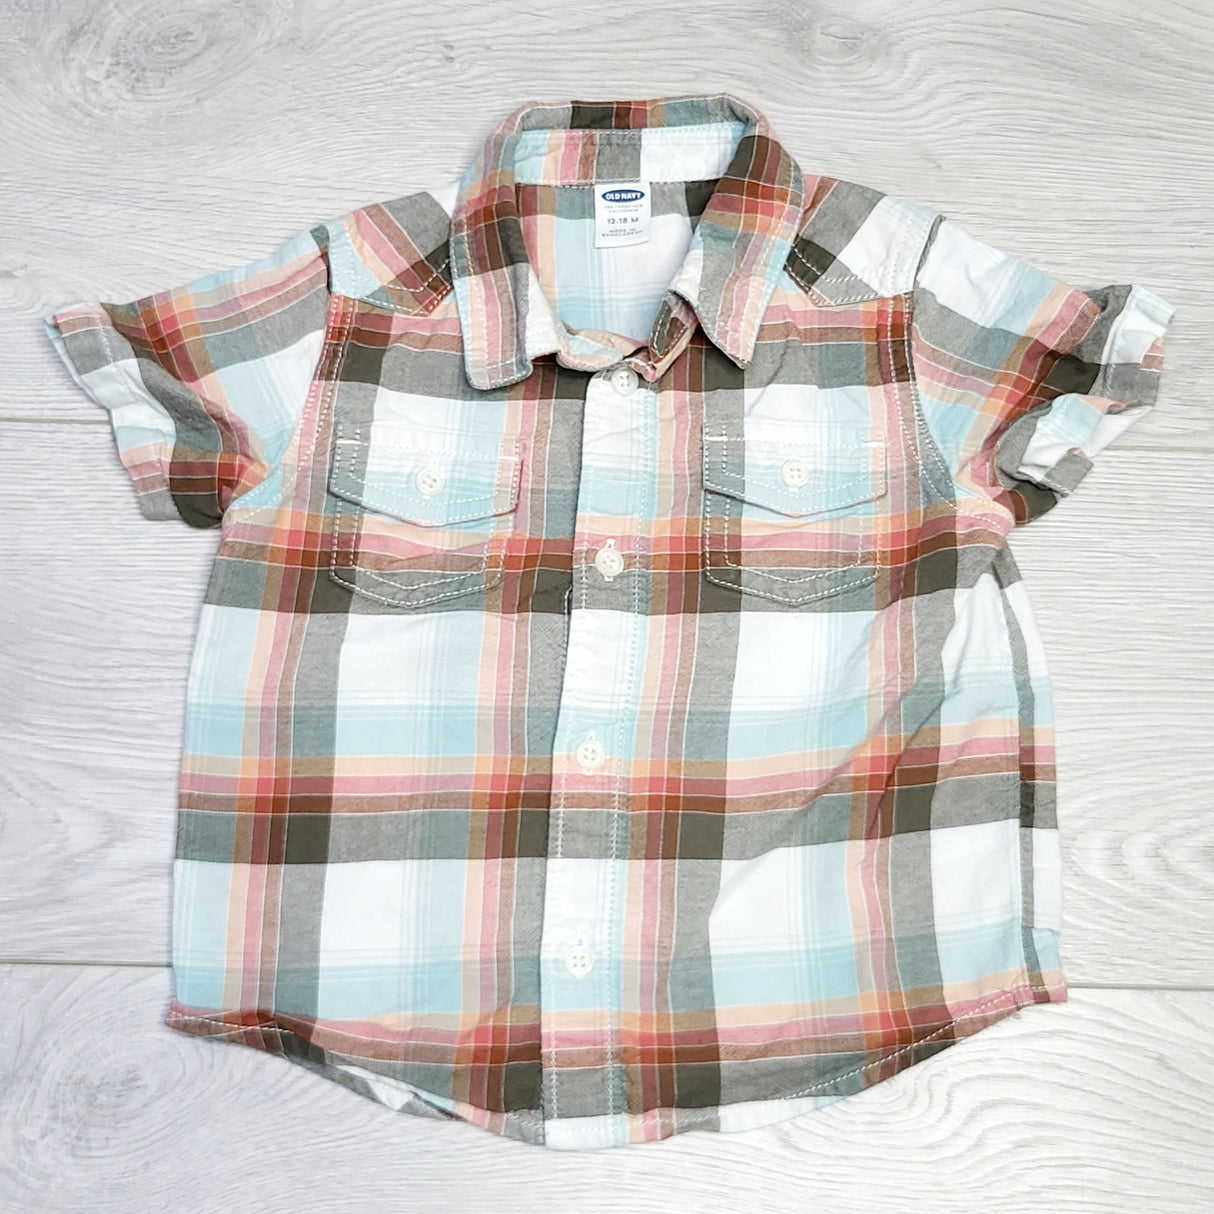 MSNDS1 - Old Navy plaid short sleeved button down shirt. Size 12-18 months